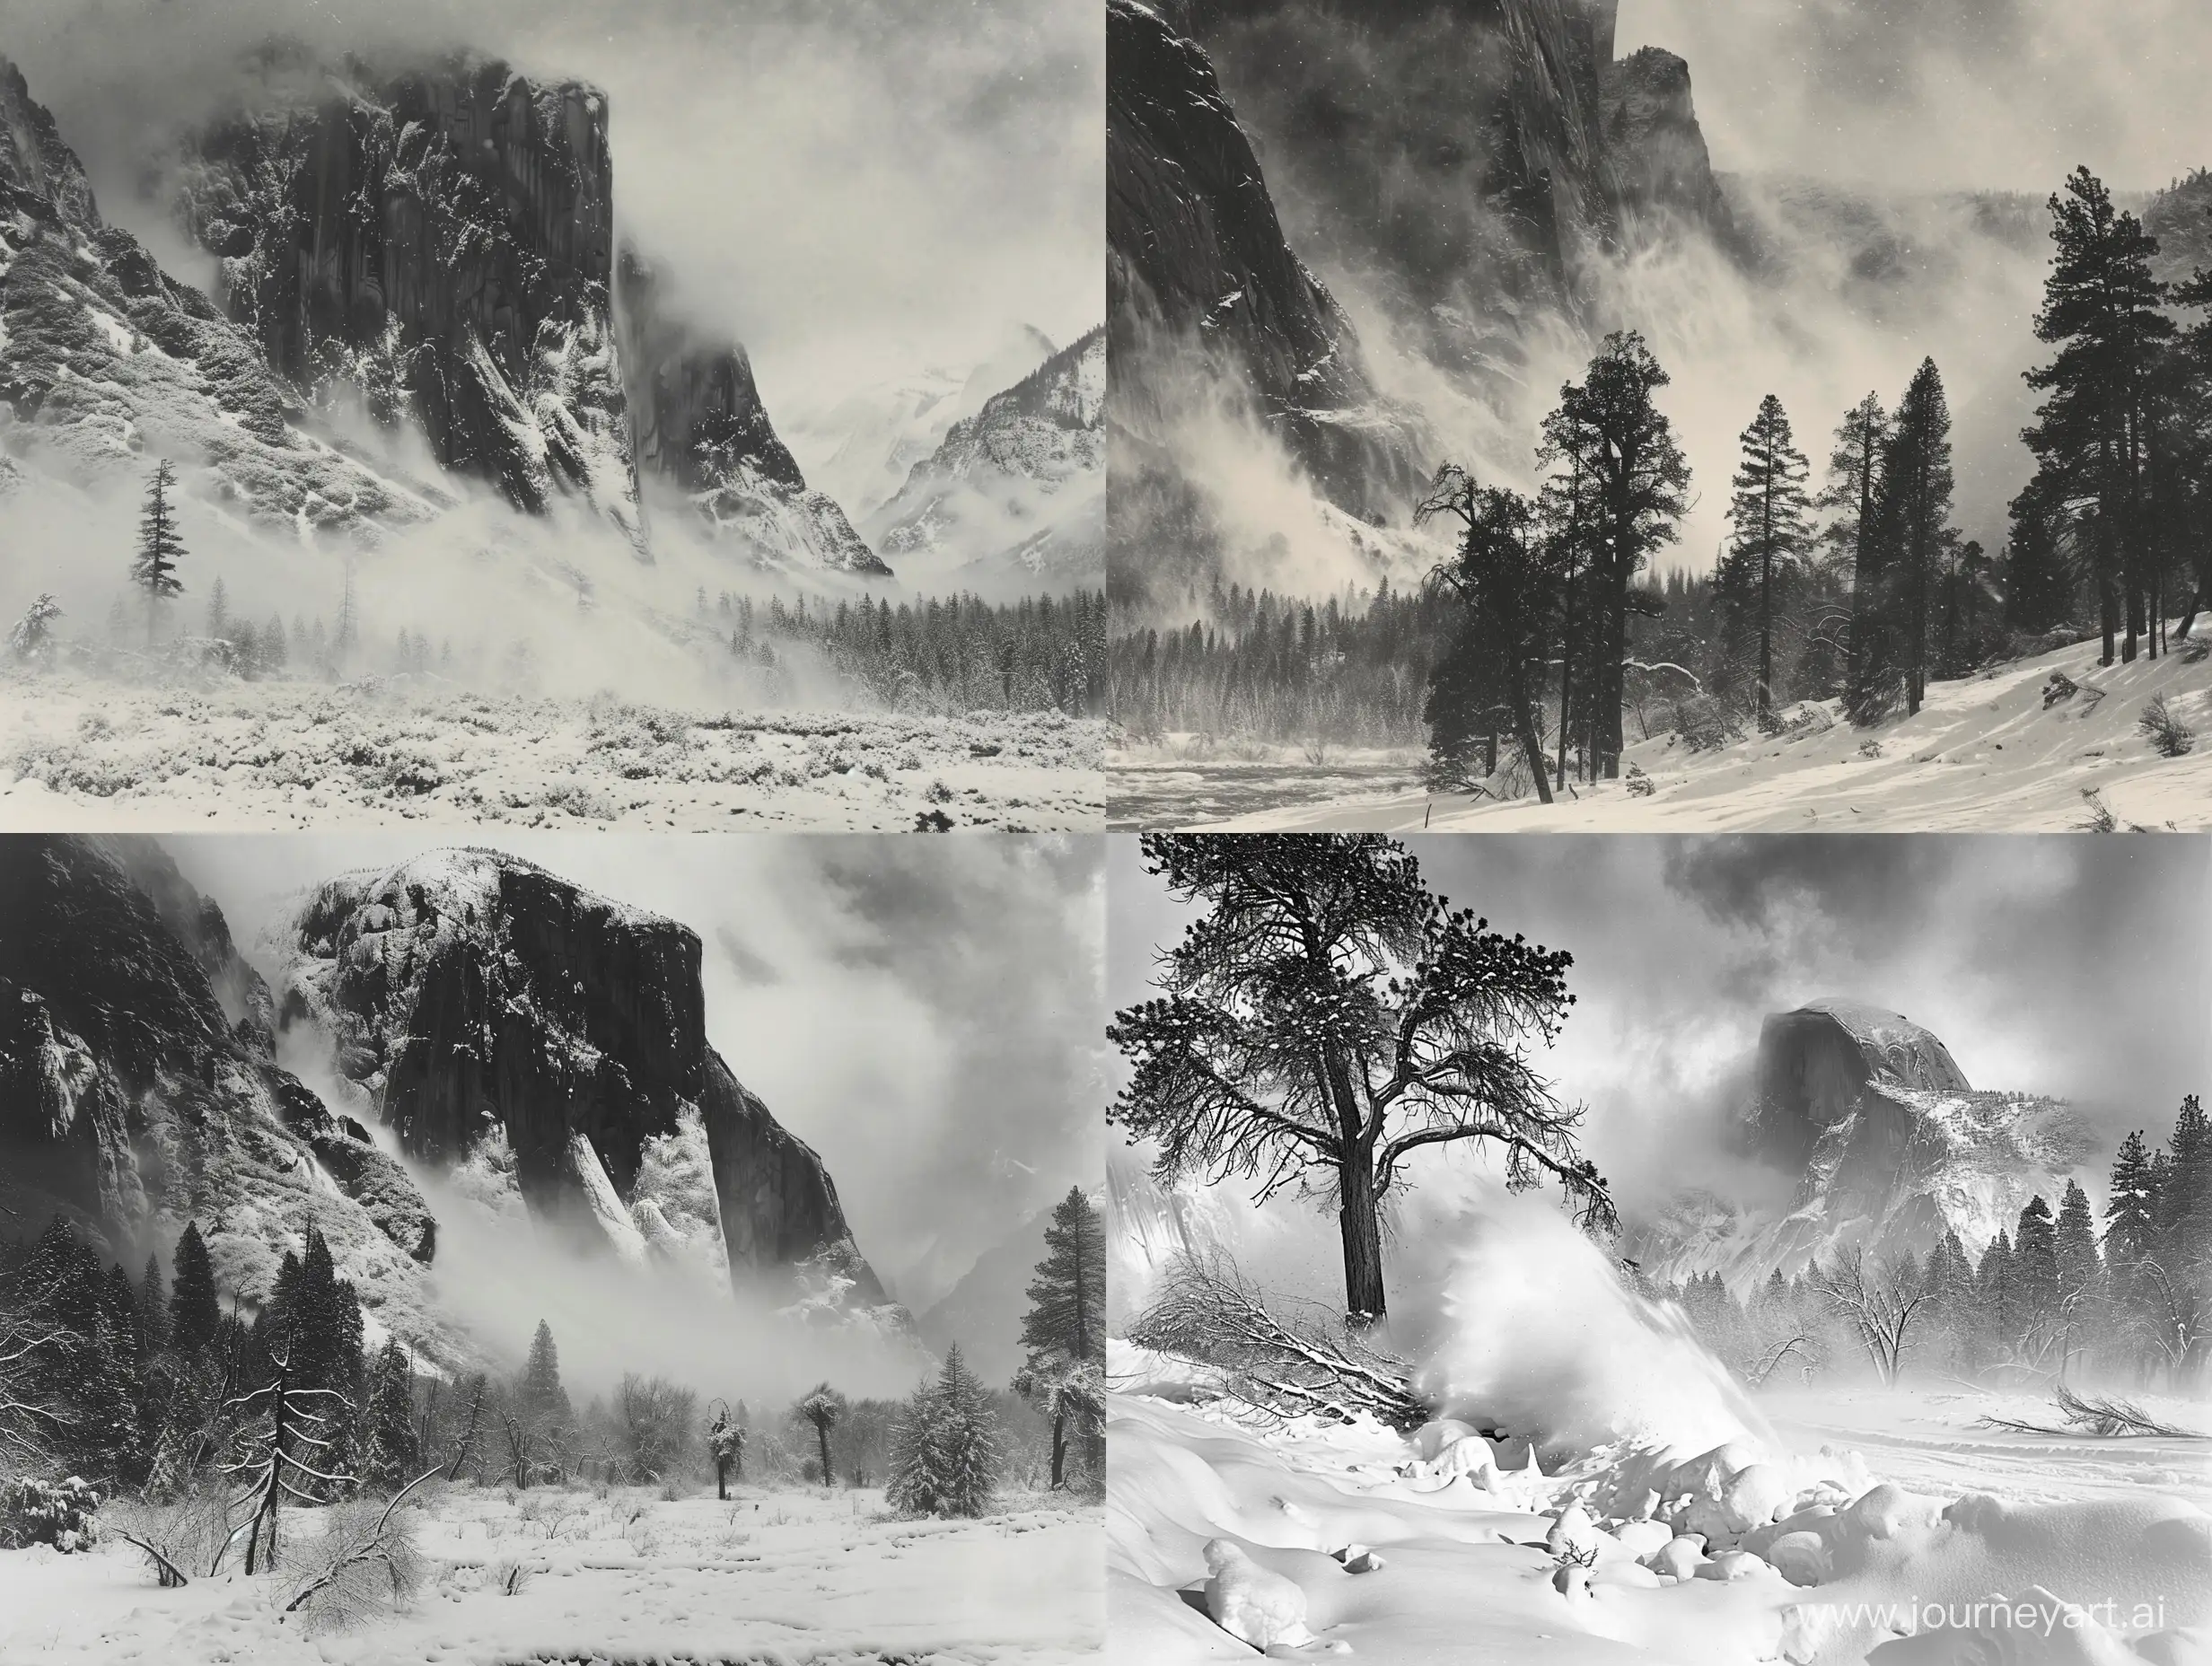 Ansel Adam's photograph titled Clearing Winter Storm, Yosemite National Park, c 1937